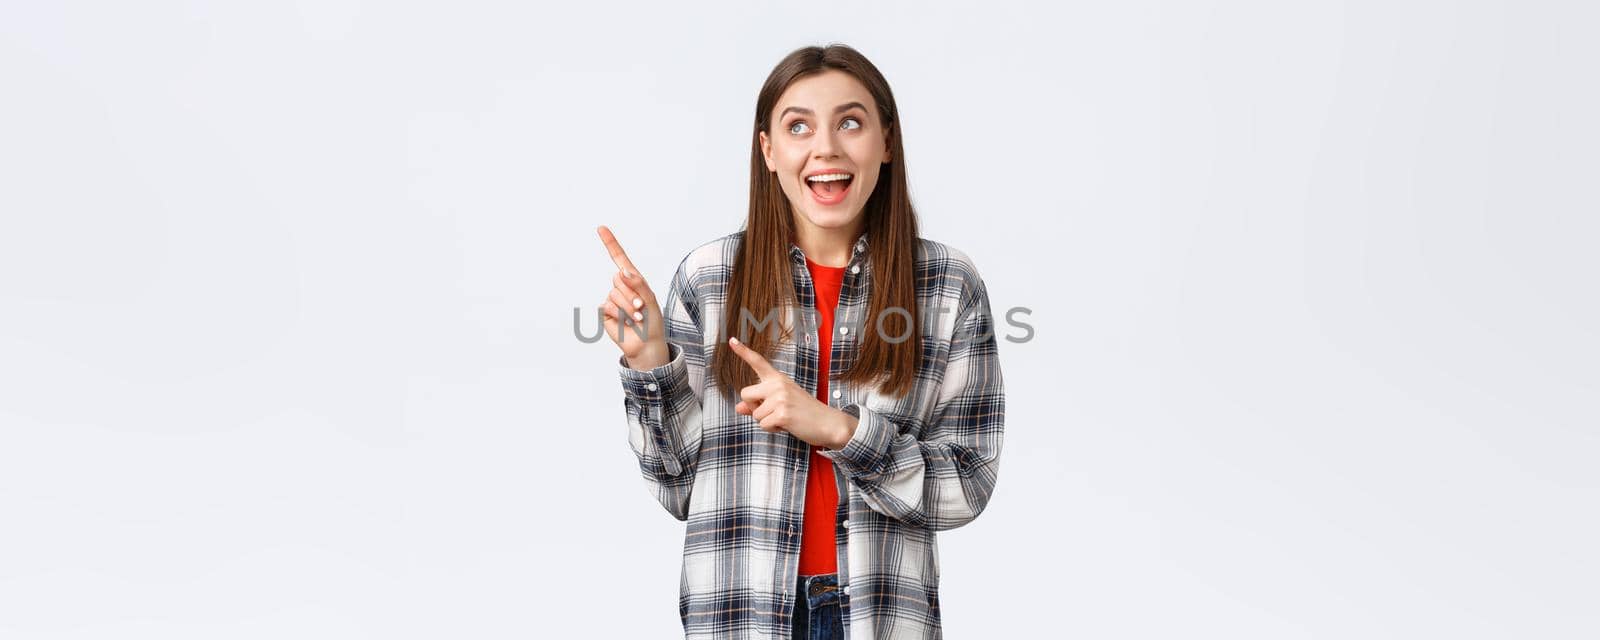 Lifestyle, different emotions, leisure activities concept. Excited happy woman in checked shirt pointing fingers upper left corner and smiling amused, making choice, found what she look for.